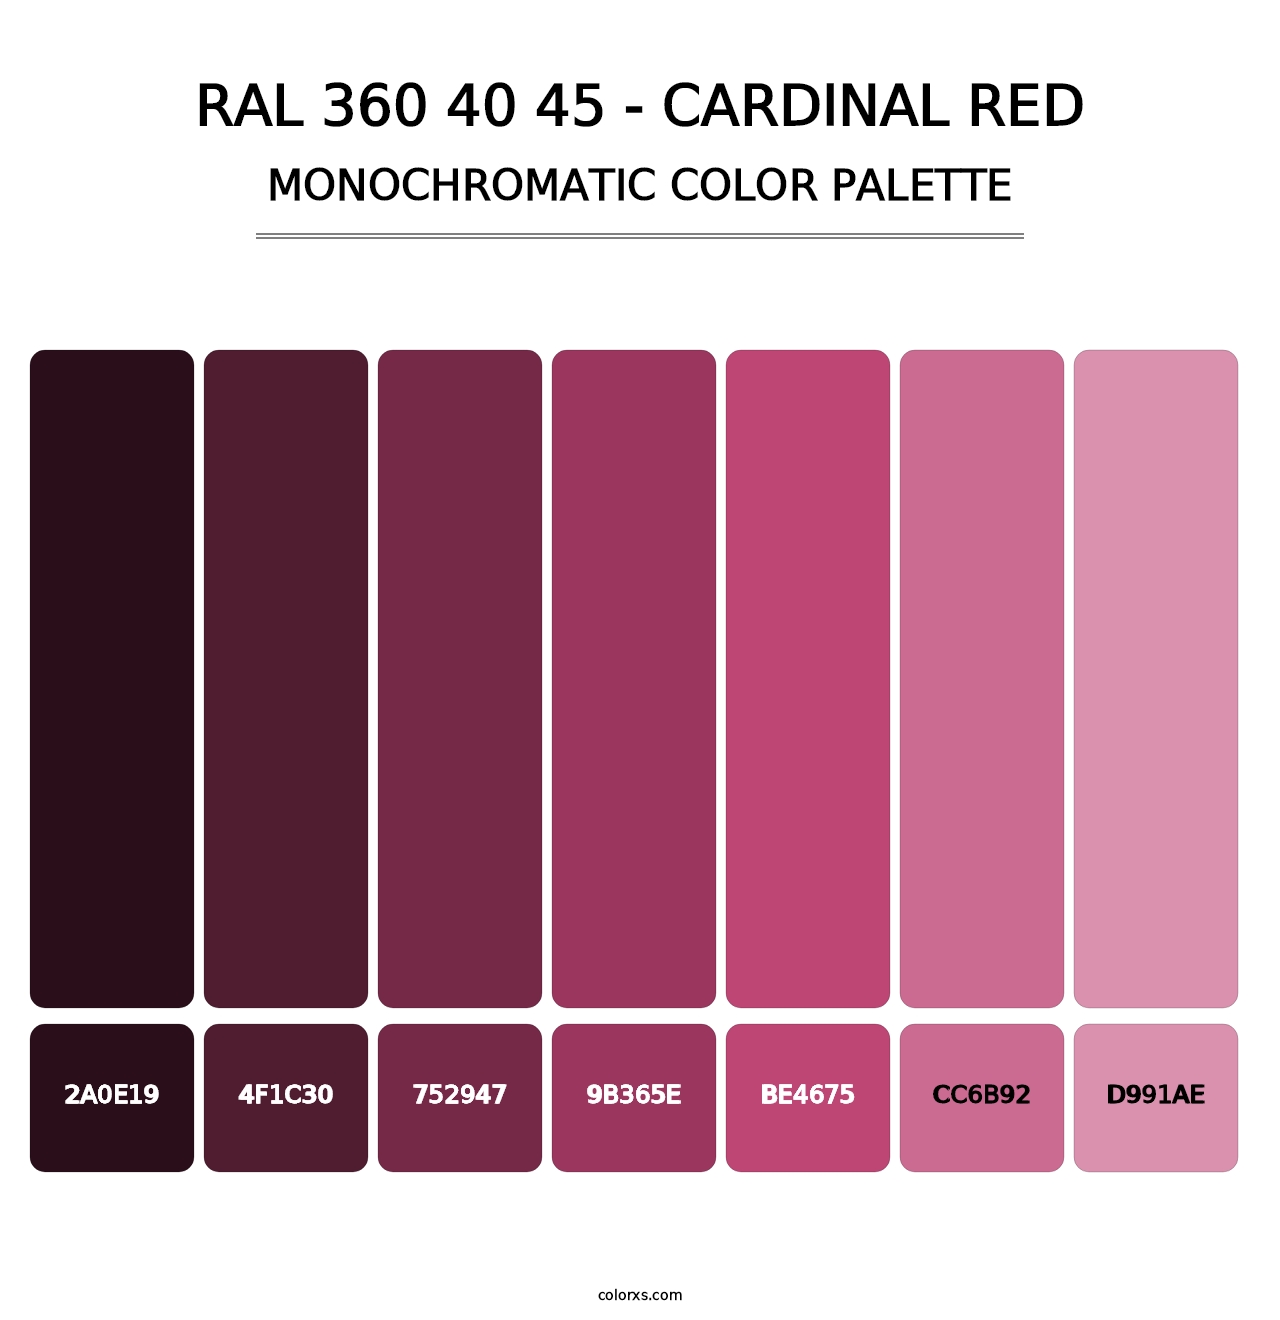 RAL 360 40 45 - Cardinal Red - Monochromatic Color Palette